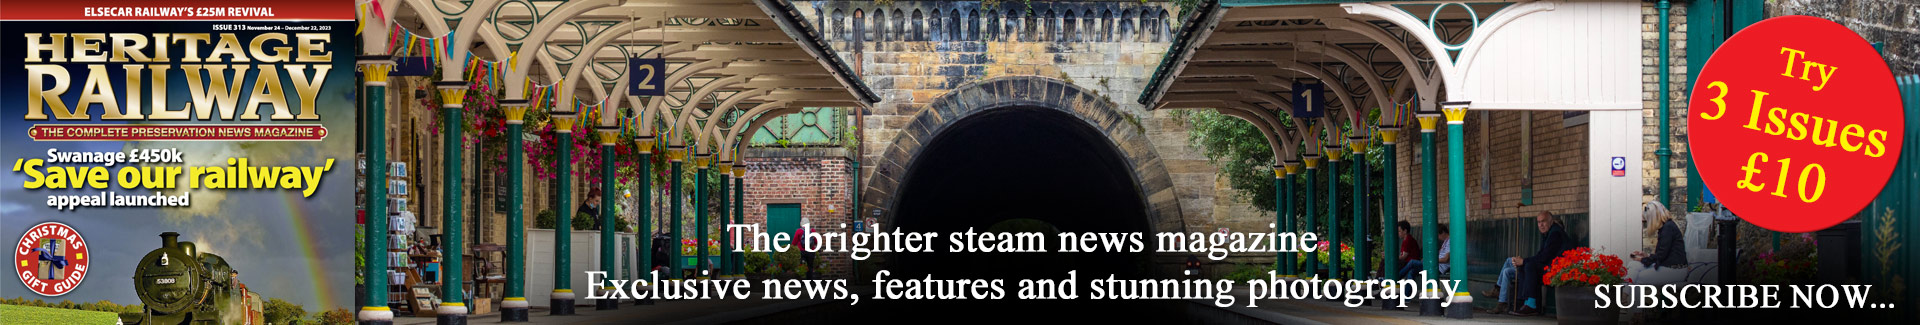 Subscriptions to Heritage Railway magazine from just £10